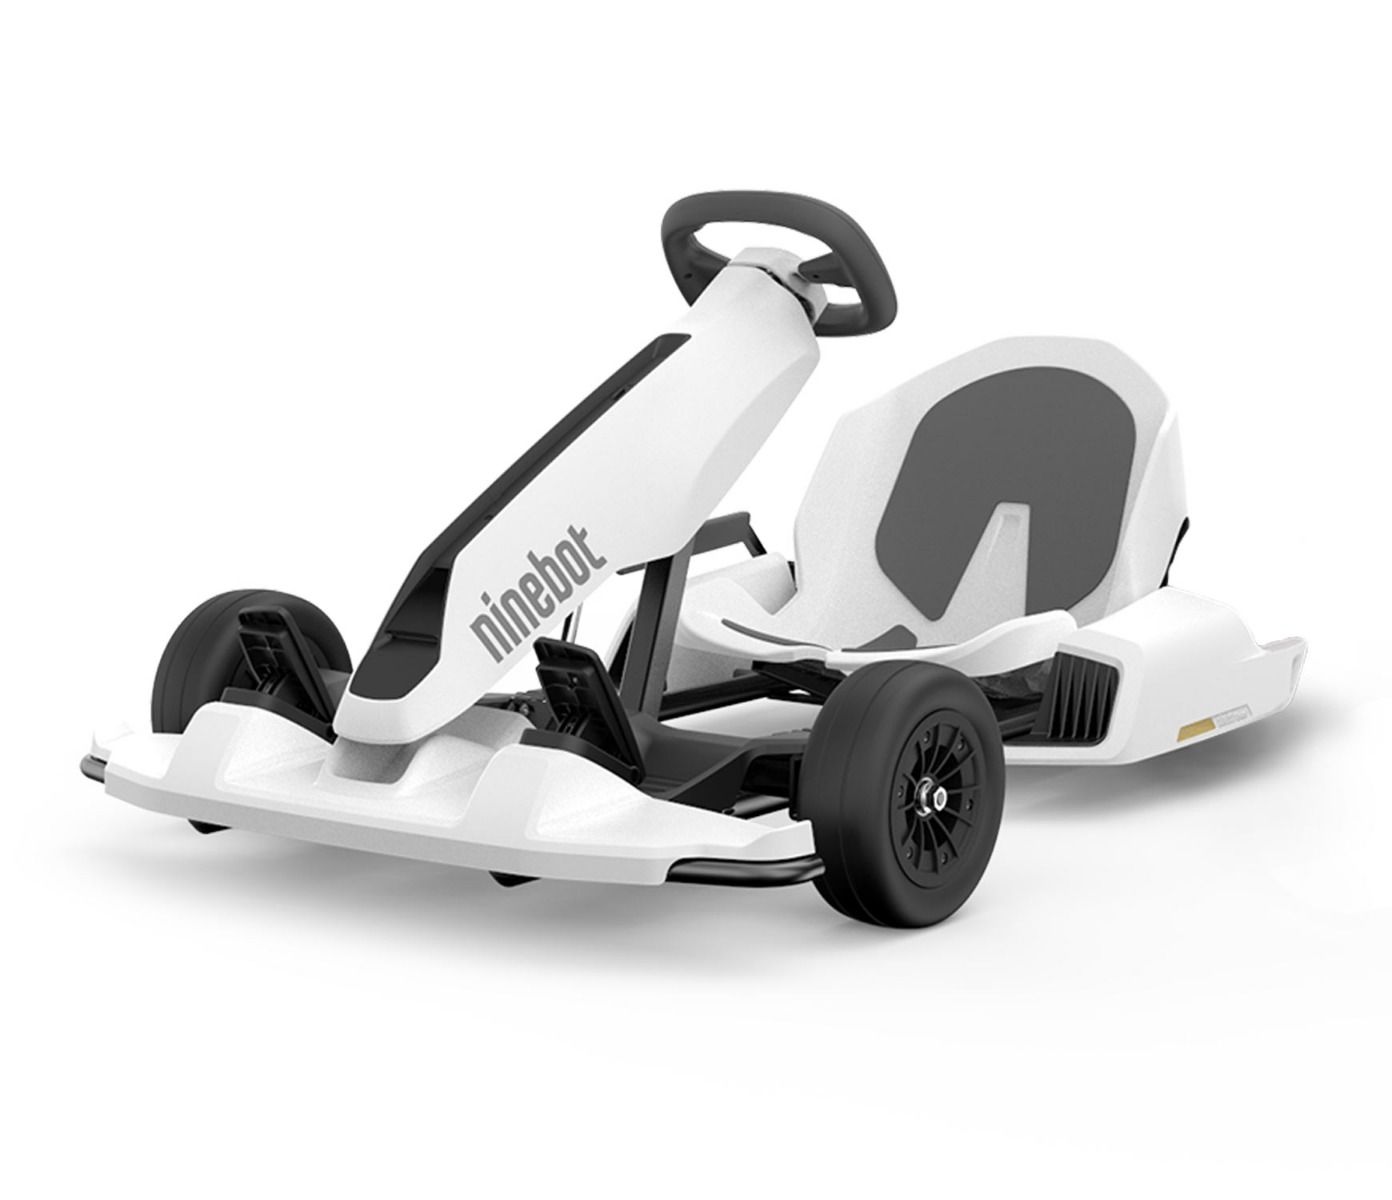 Best Go Karts For 10-Year-Old 2020